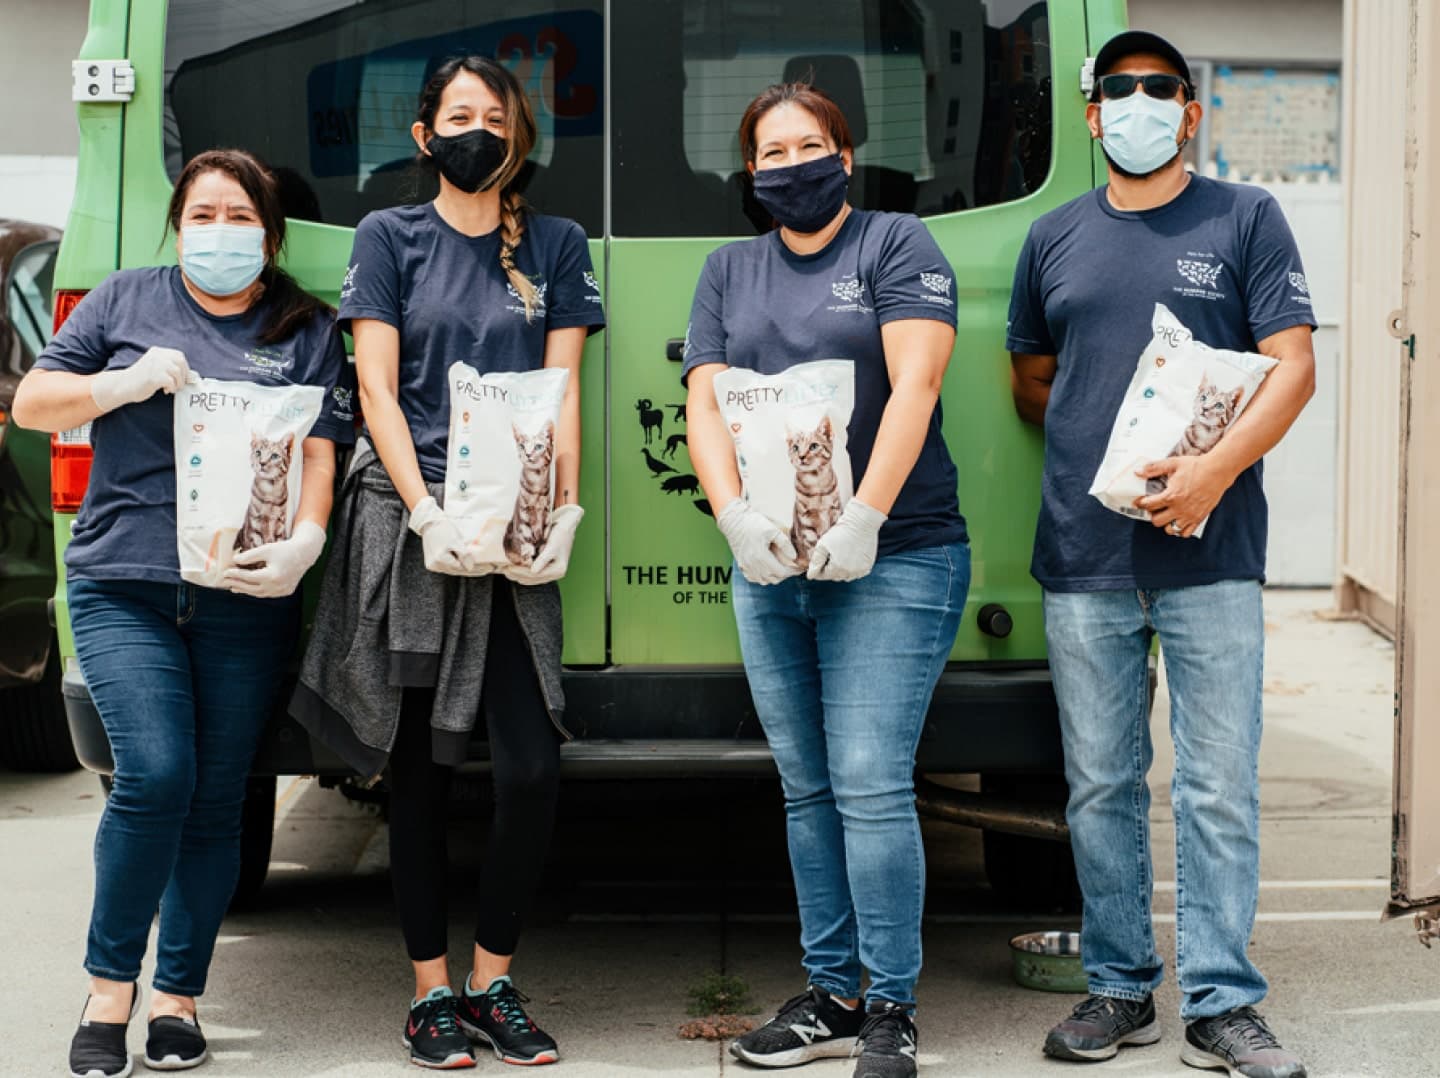 Four people in masks holding PrettyLitter bags in front of a green van